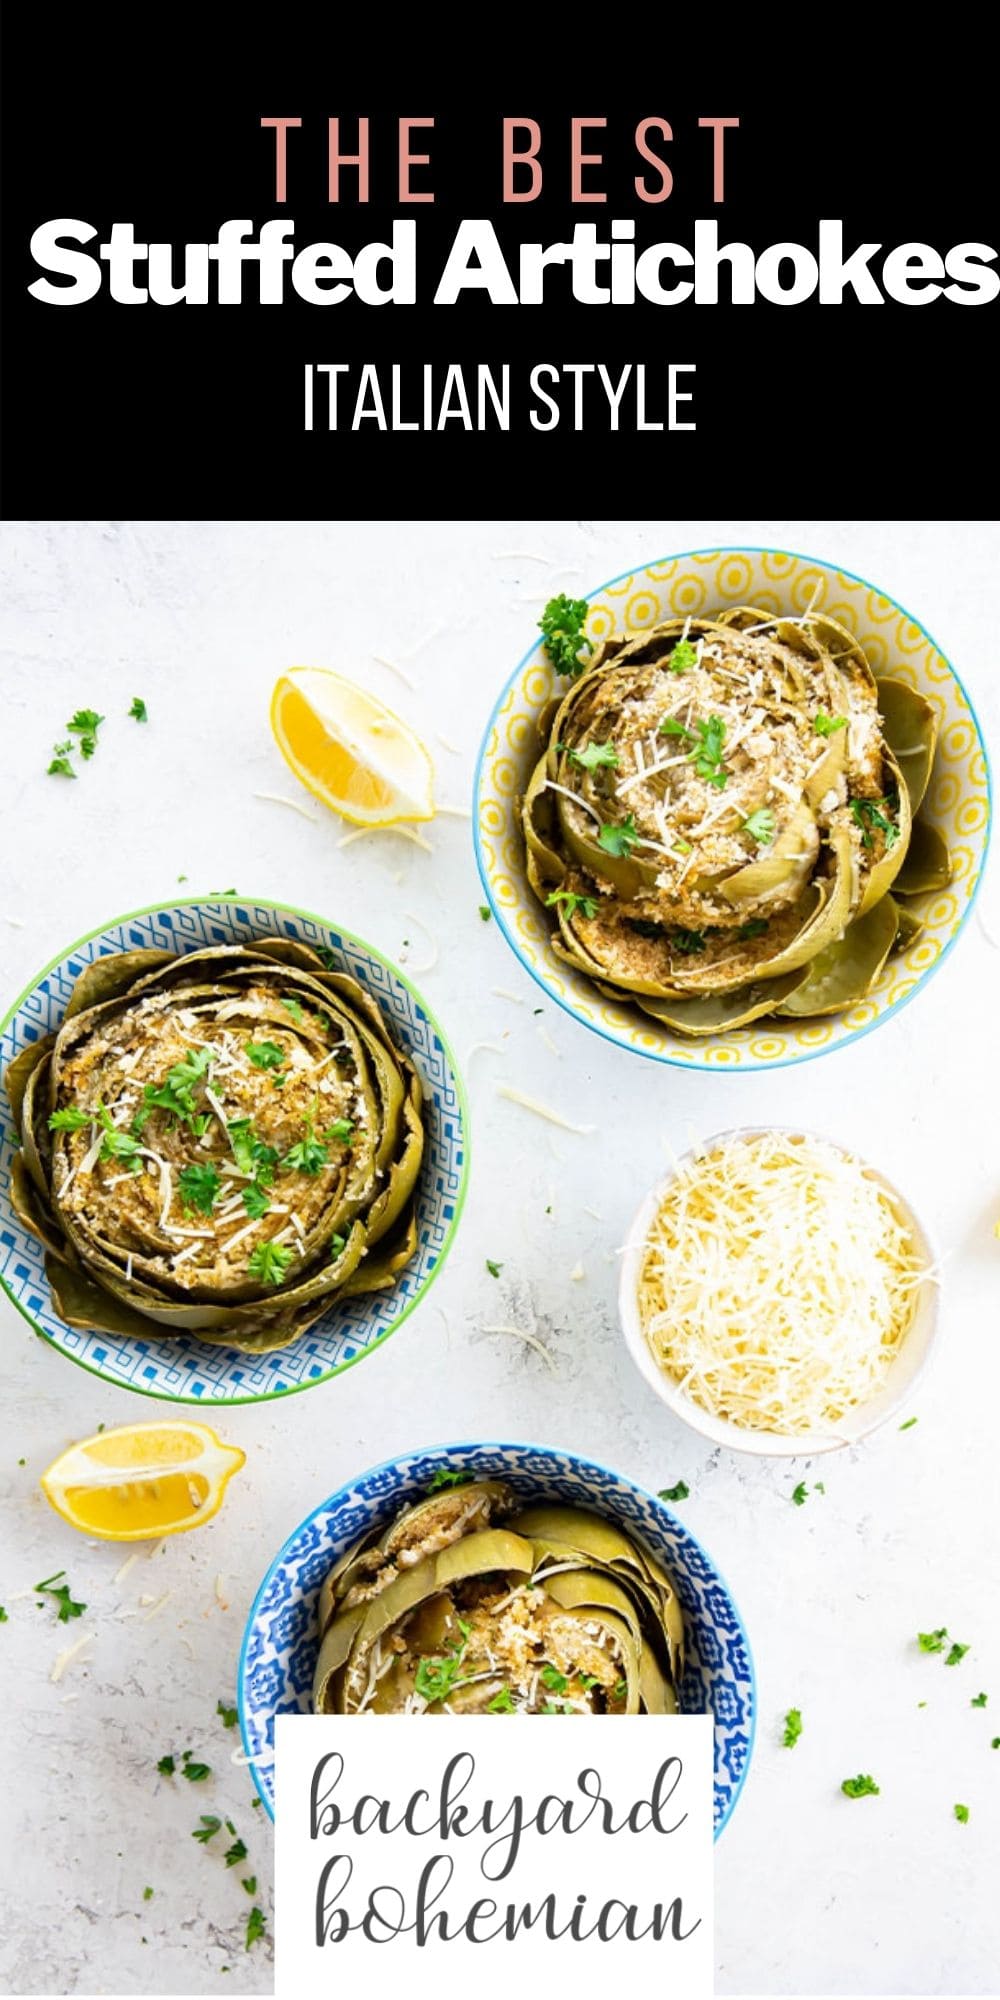 Italian stuffed artichokes are made with simple, healthy ingredients and are ready in under 1 hour. These stuffed artichokes can be made on the stovetop or the Instant Pot!